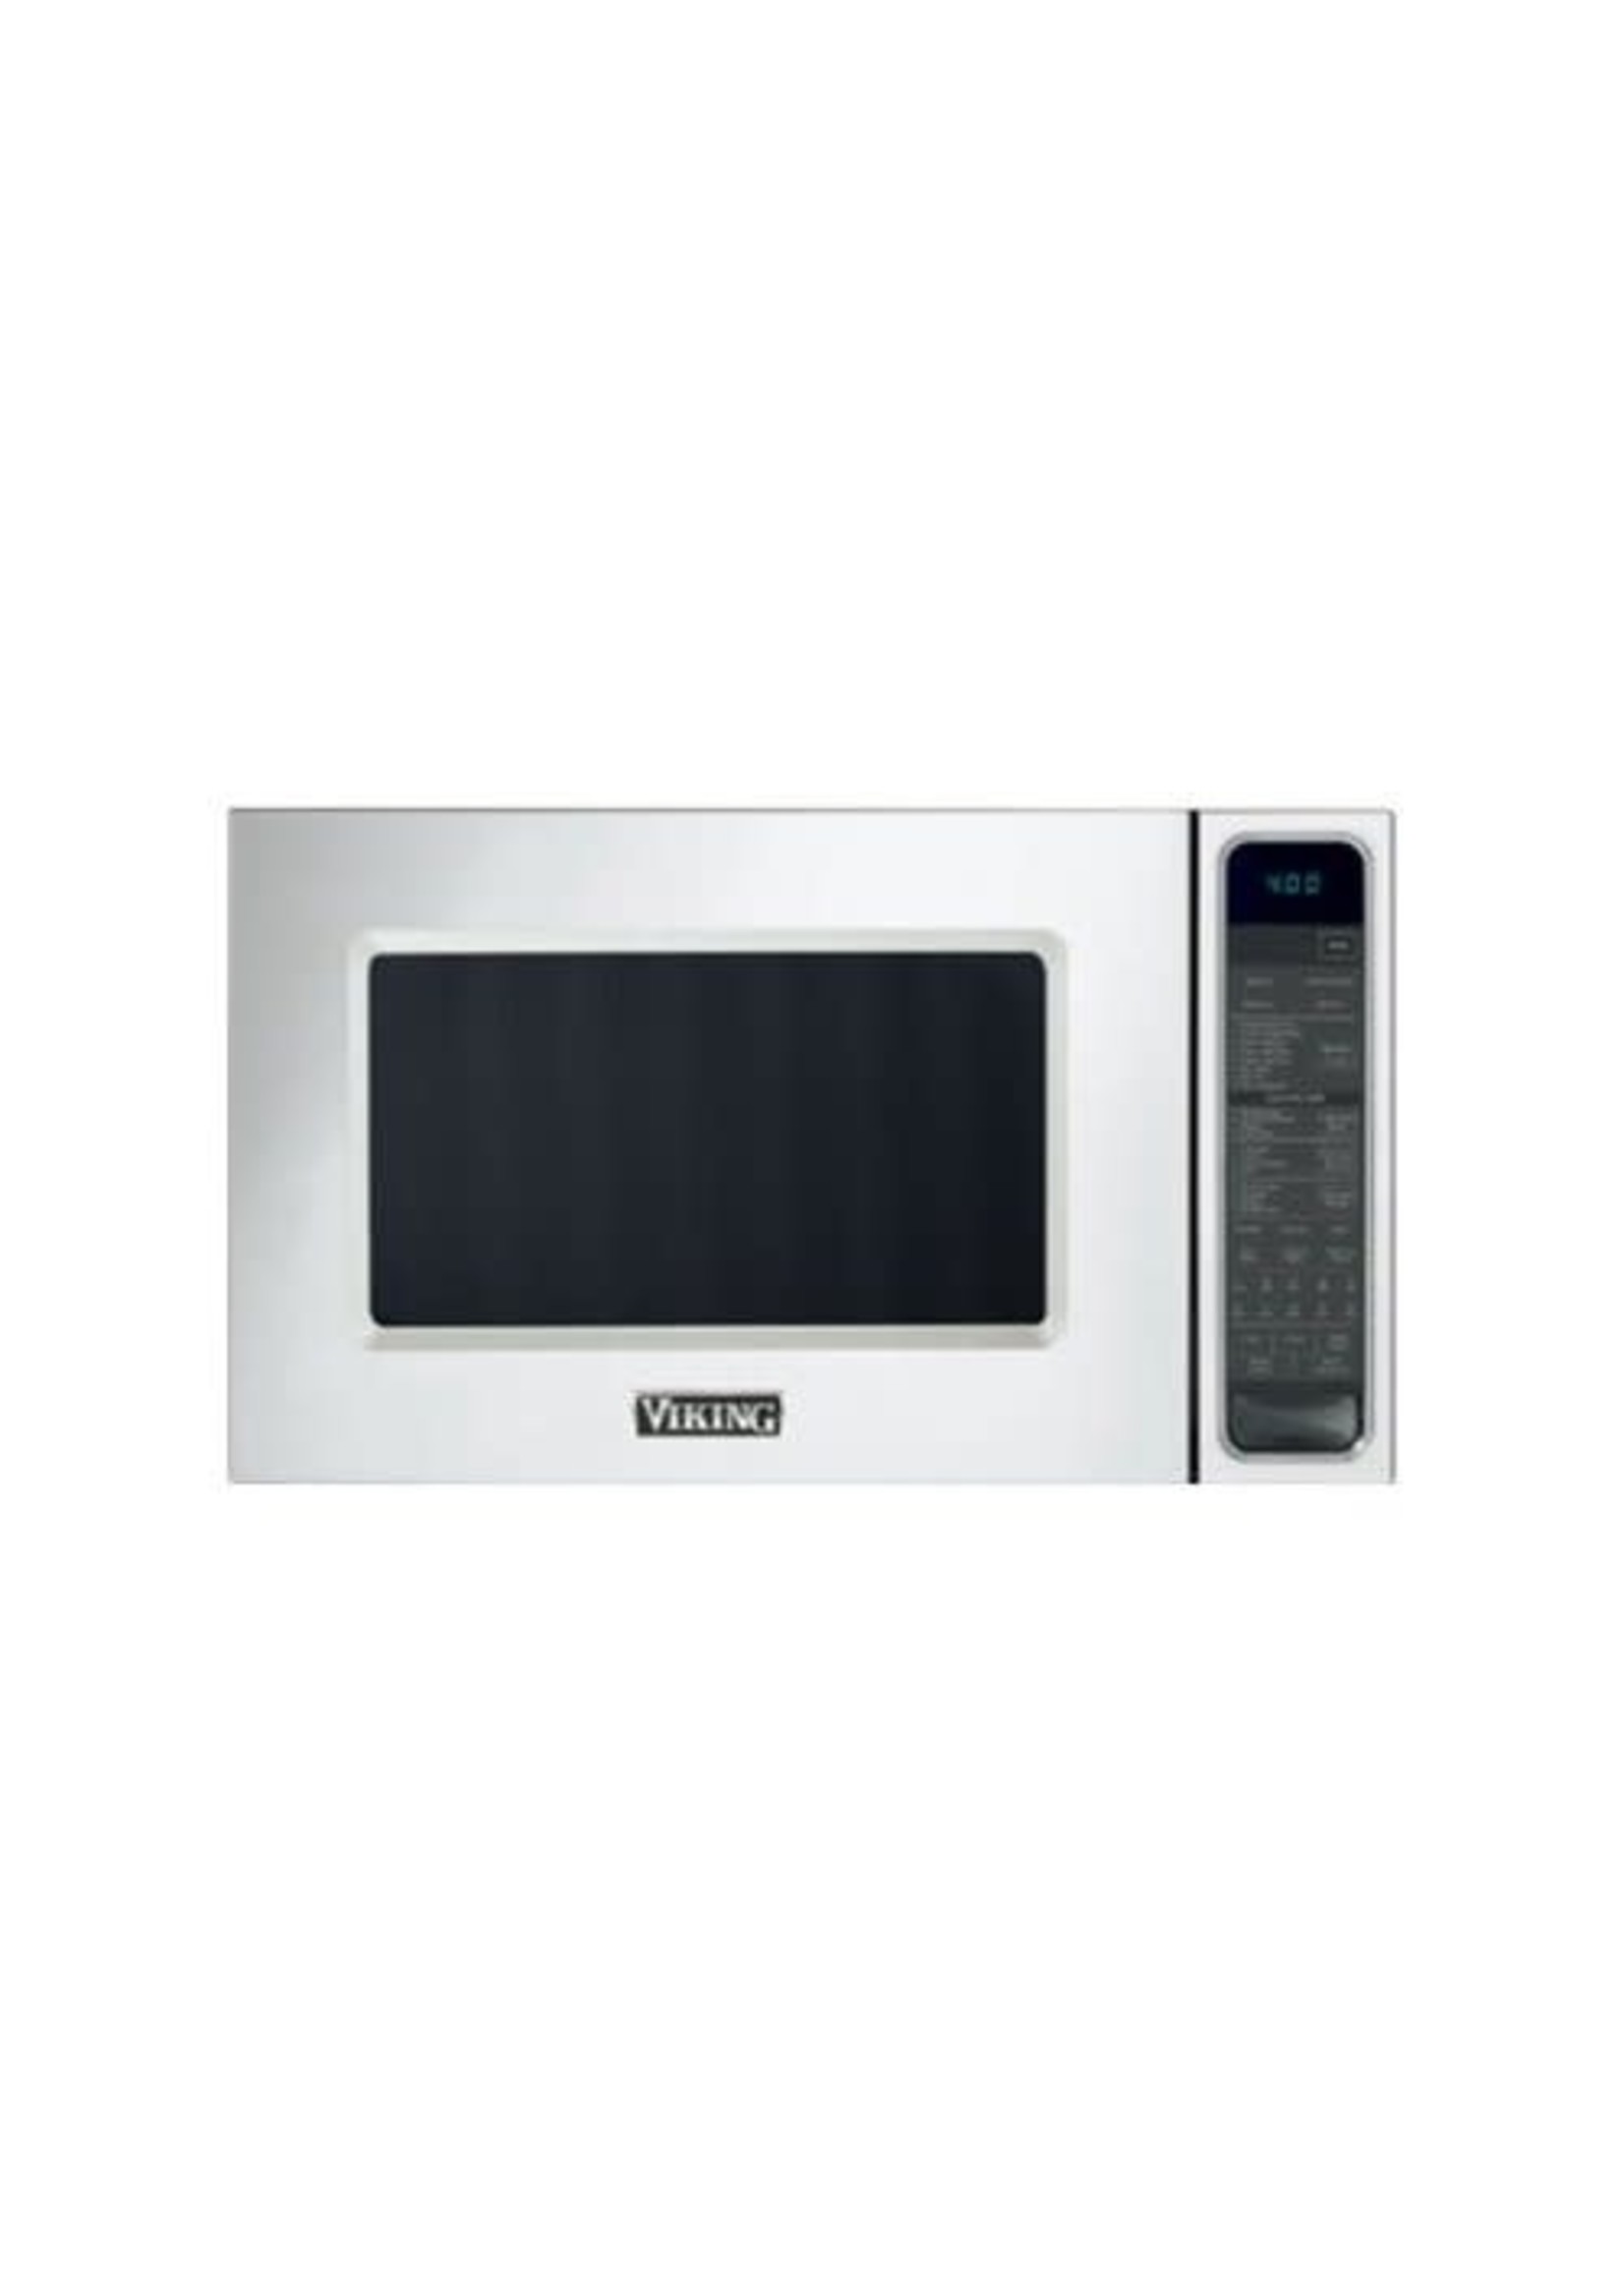 VIKING Viking - 5 Series 1.5 Cu. Ft. Convection Microwave with Sensor Cooking - Stainless steel